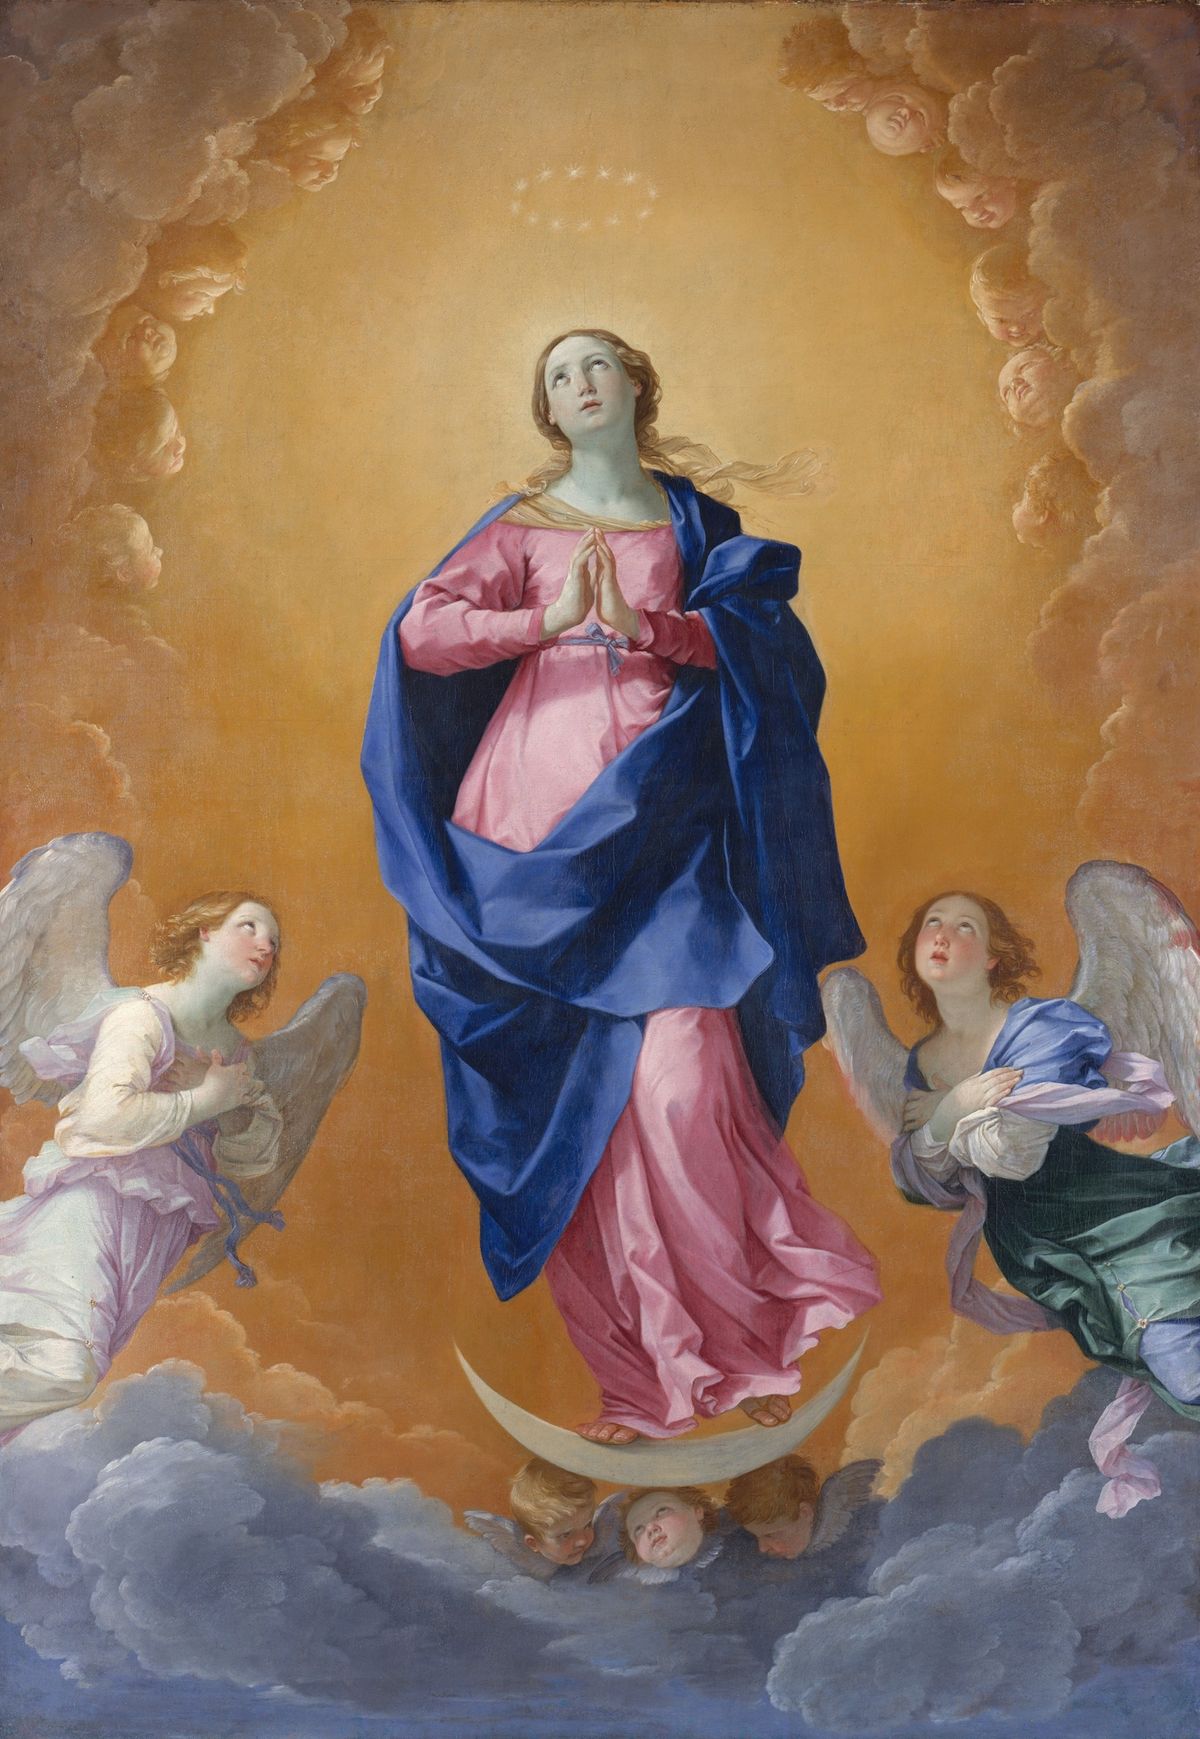 The Immaculate Conception (1627) Guido Reni - Public Domain Catholic Painting